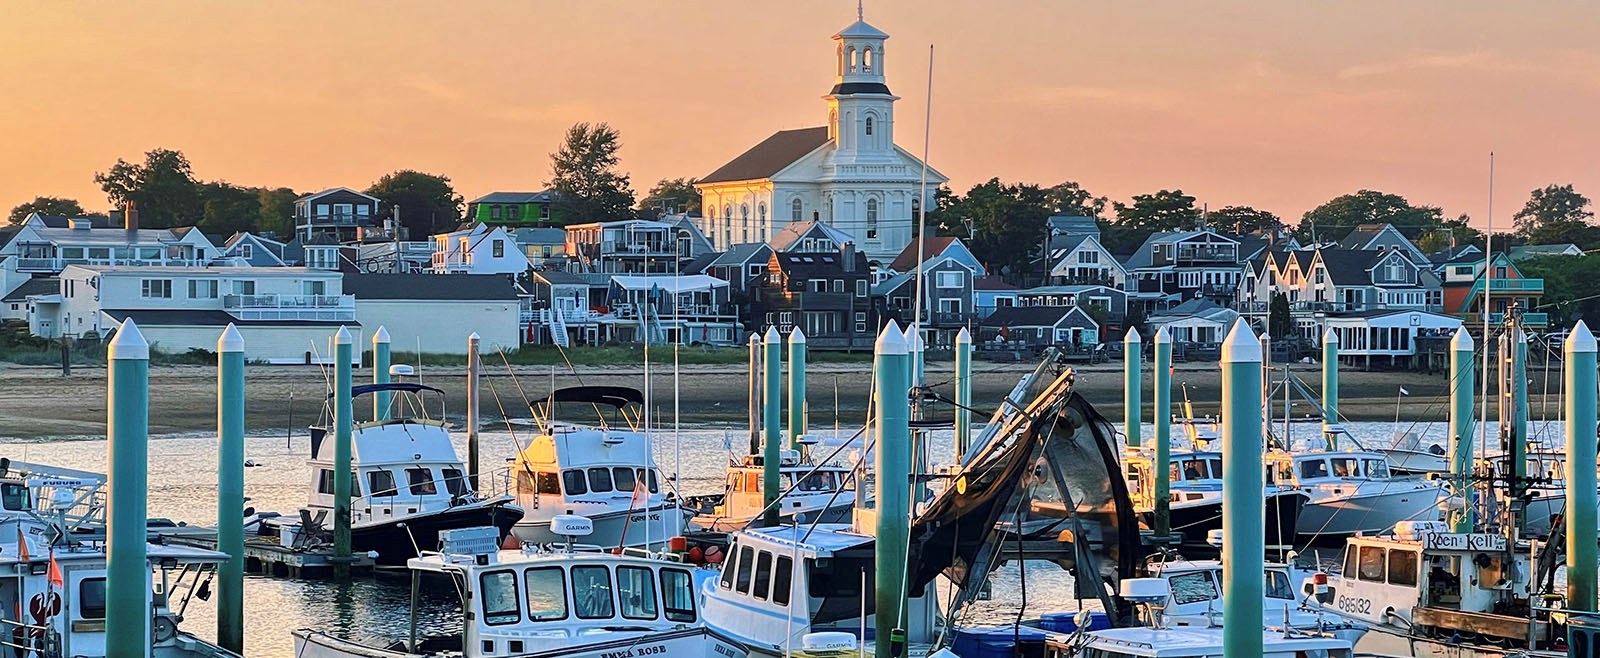 The summer season is right around the corner and we're celebrating by attending these festive events! Get ready for warmer weather and heaps of excitement on Cape Cod!